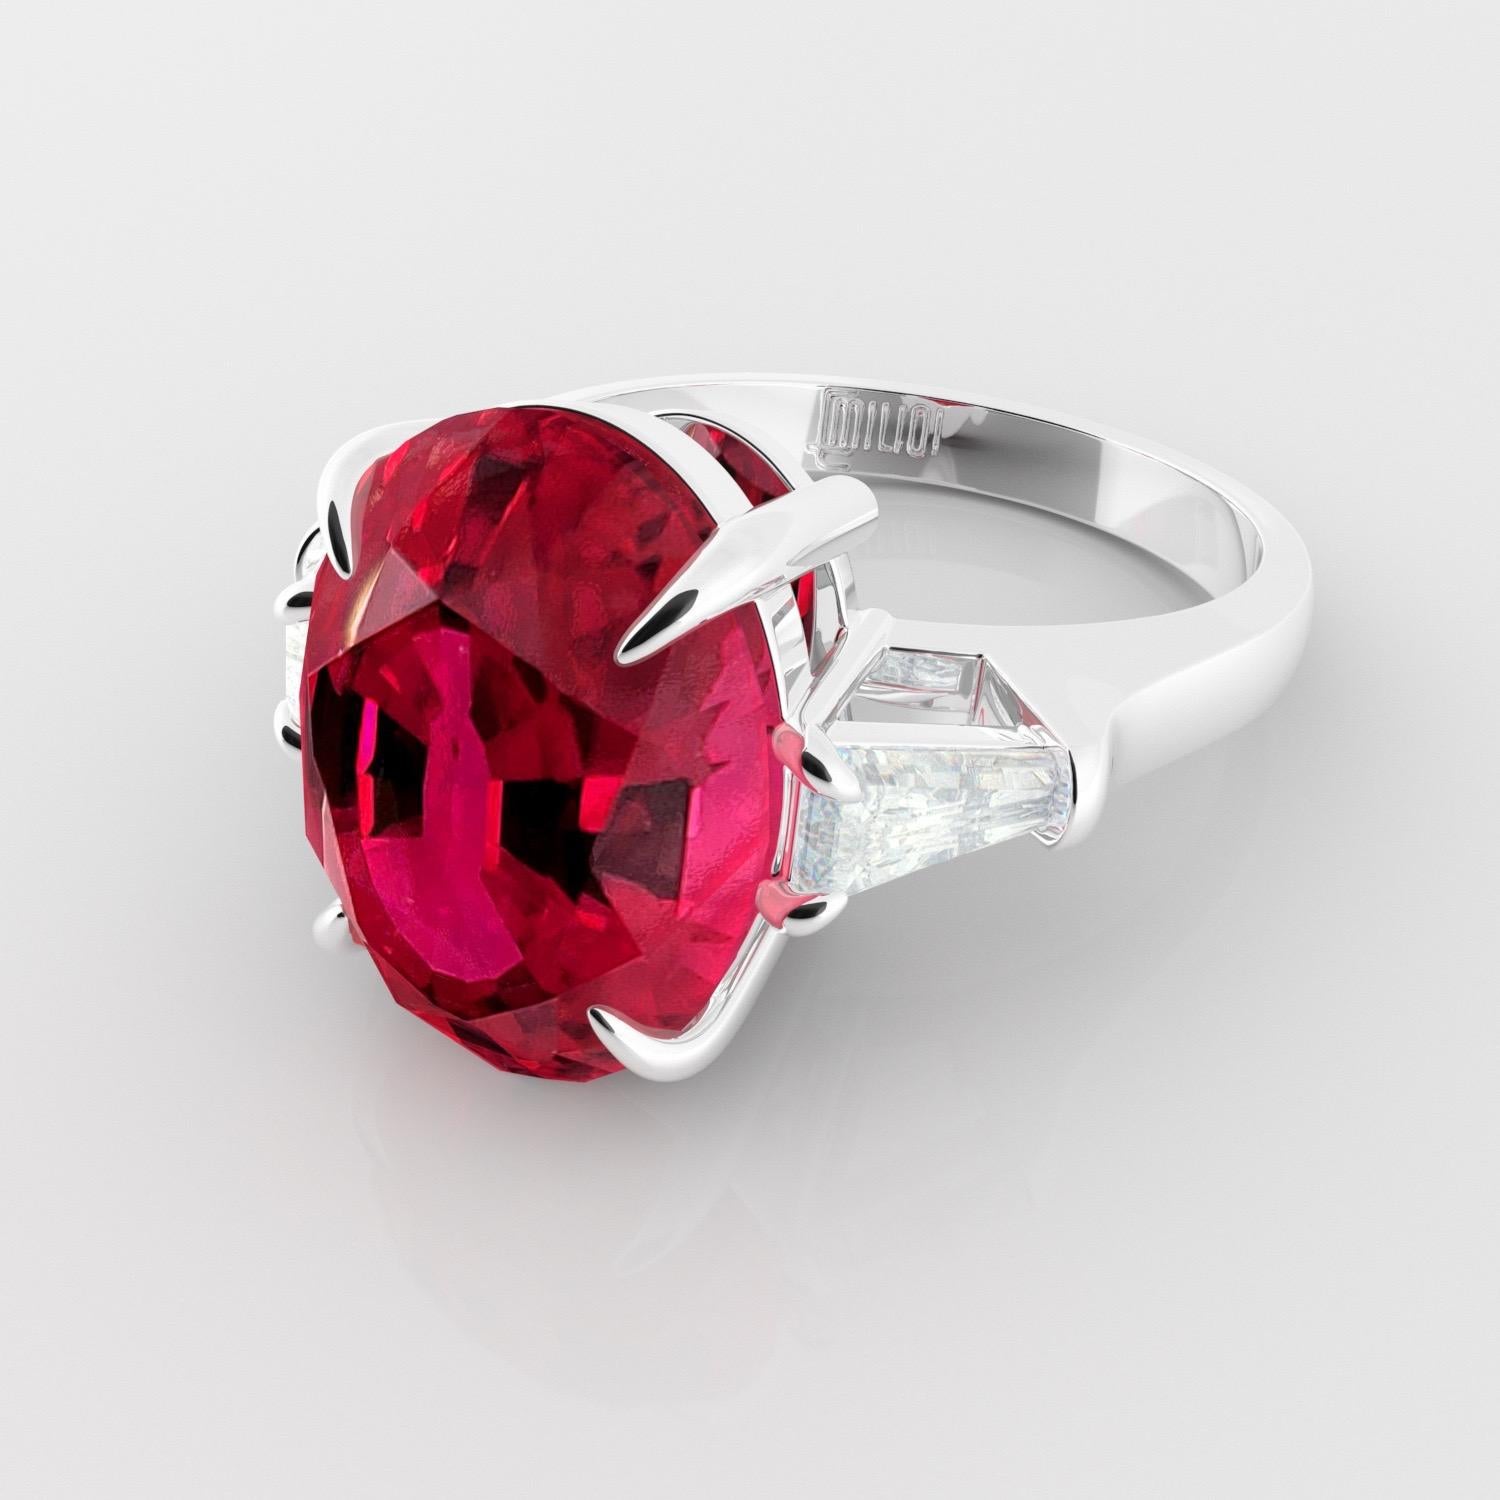 From the museum vault at Emilio Jewelry New York,
A magnificent Mozambique ruby sits in the center of our hand made ring, classified on the certificate as Vivid Red. Please inquire for details and certificate copy. 